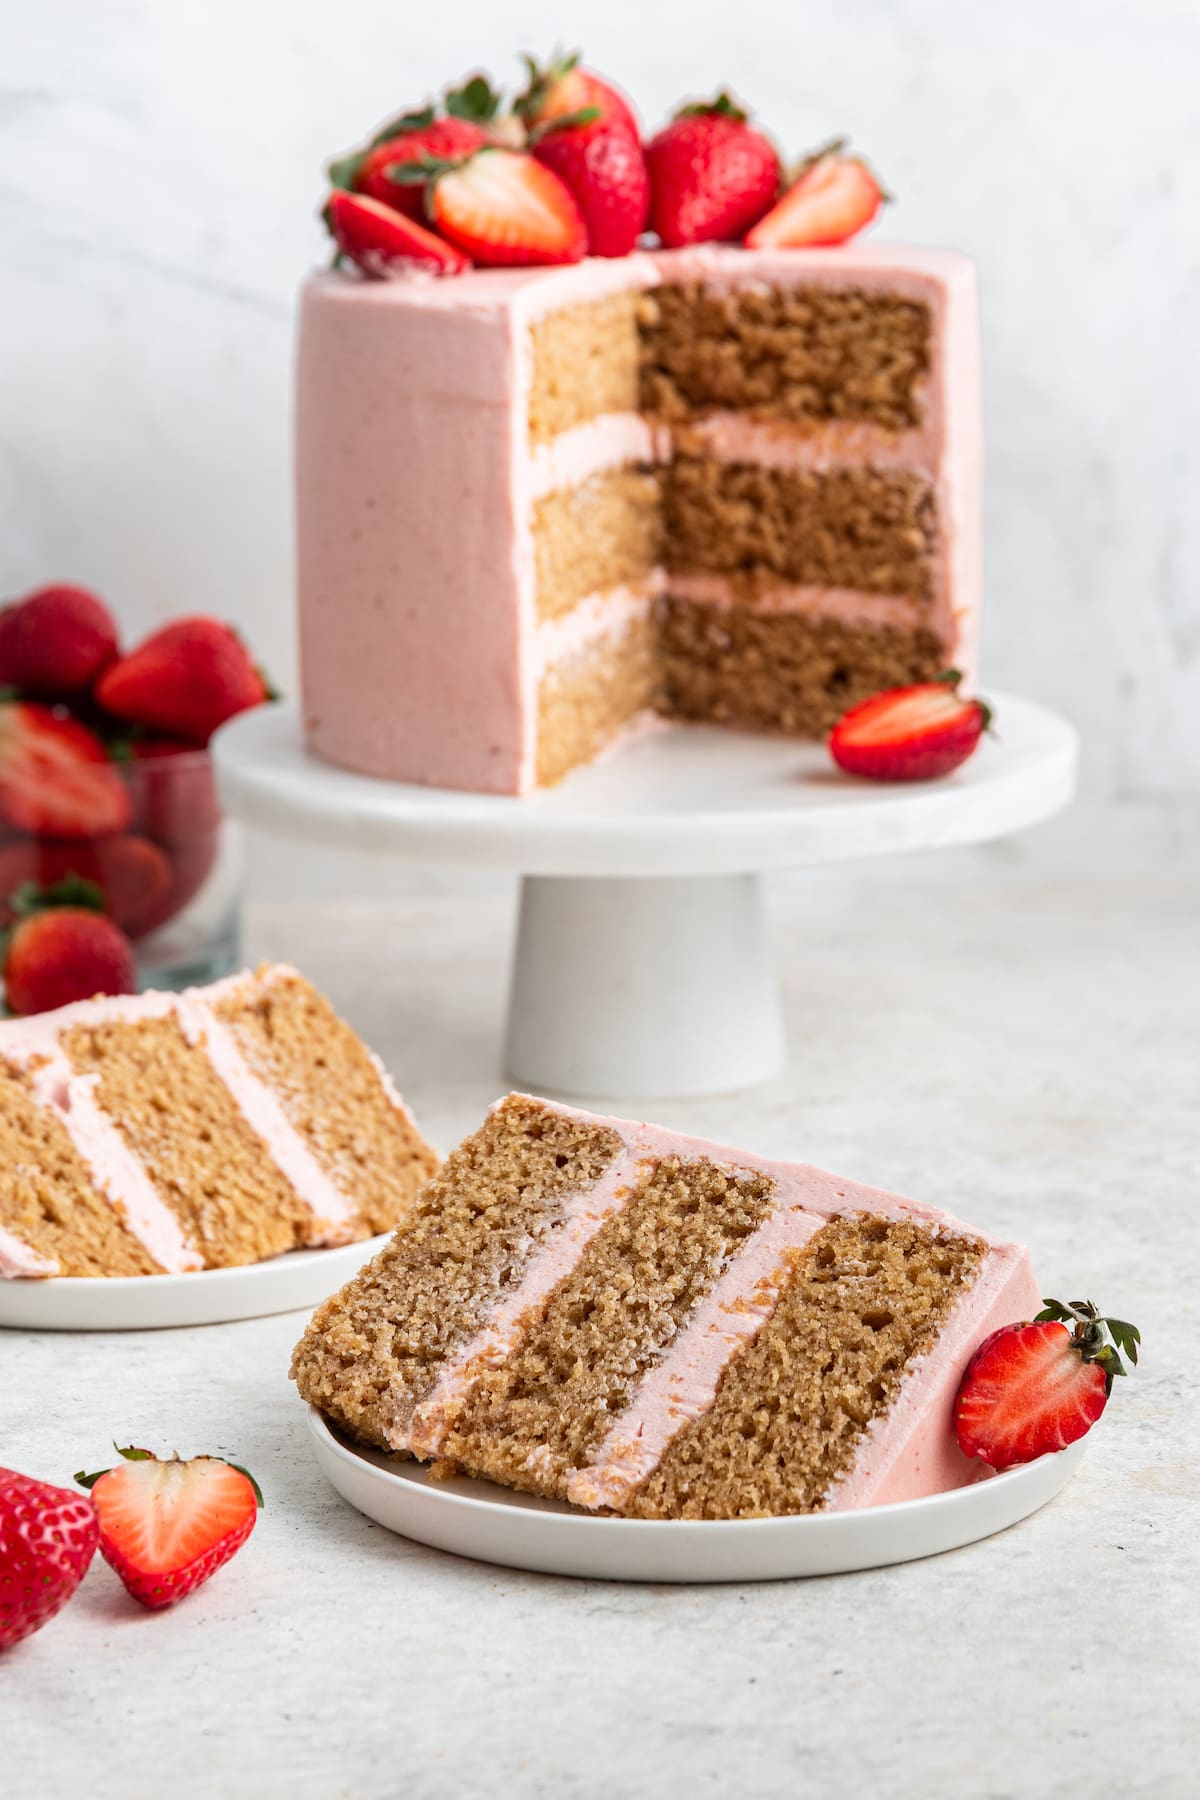 Two slices of strawberry cake on separate small white plates. The strawberry cake is on a small pedestal in the background with pink frosting and fresh strawberries on top of the cake.